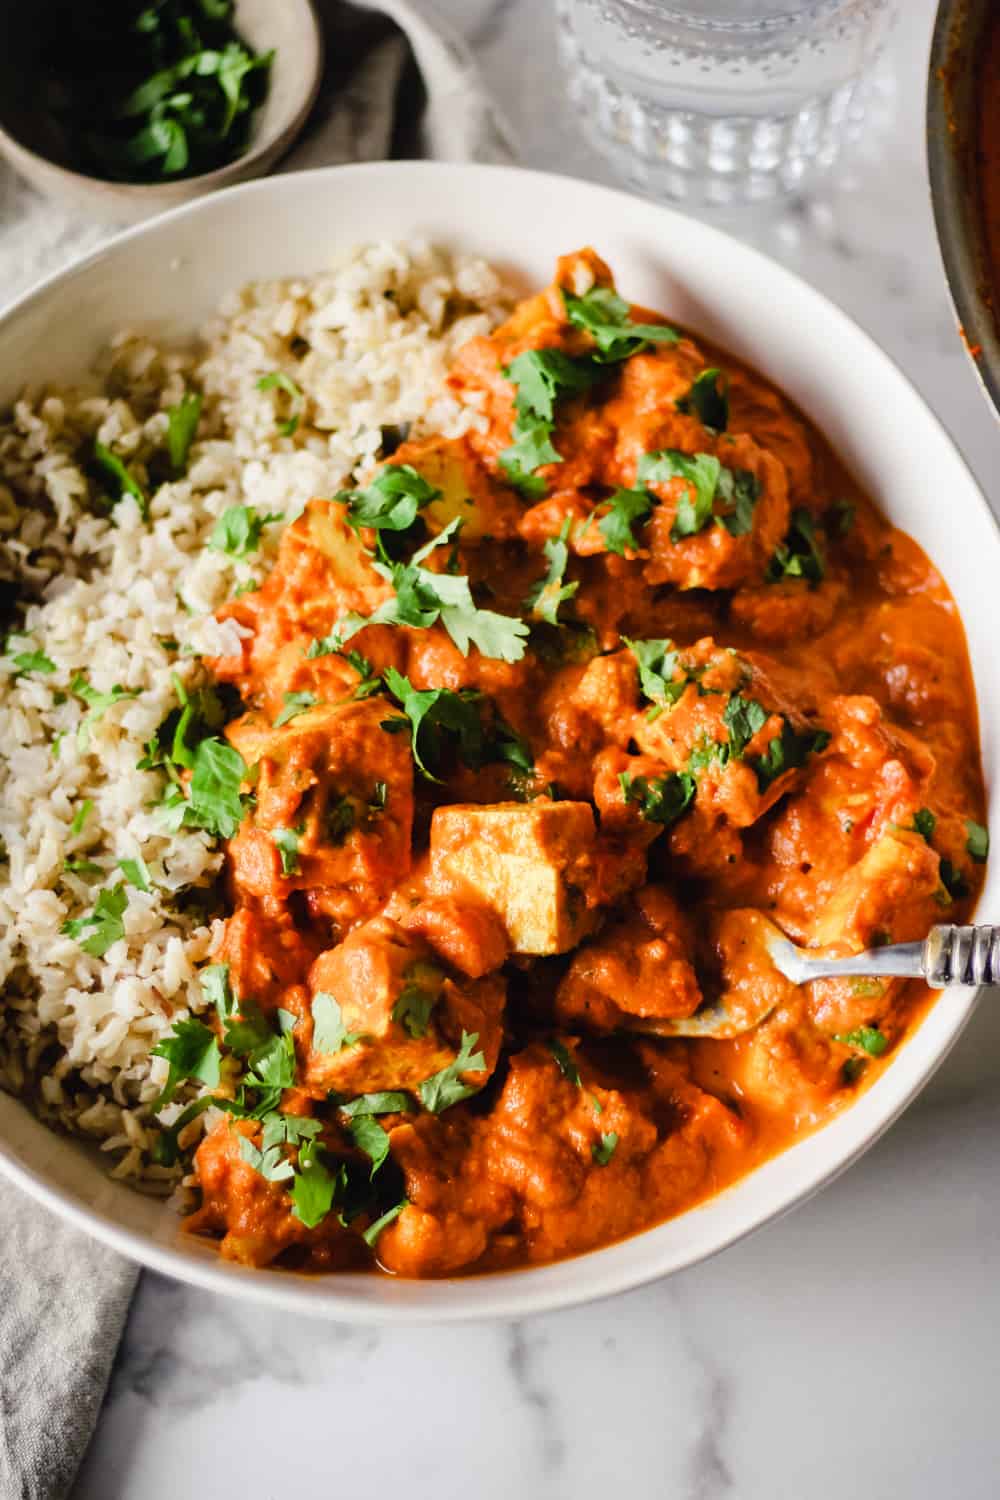 Vertical image of Vegan Tikka Masala with rice and cilantro in a white bowl.